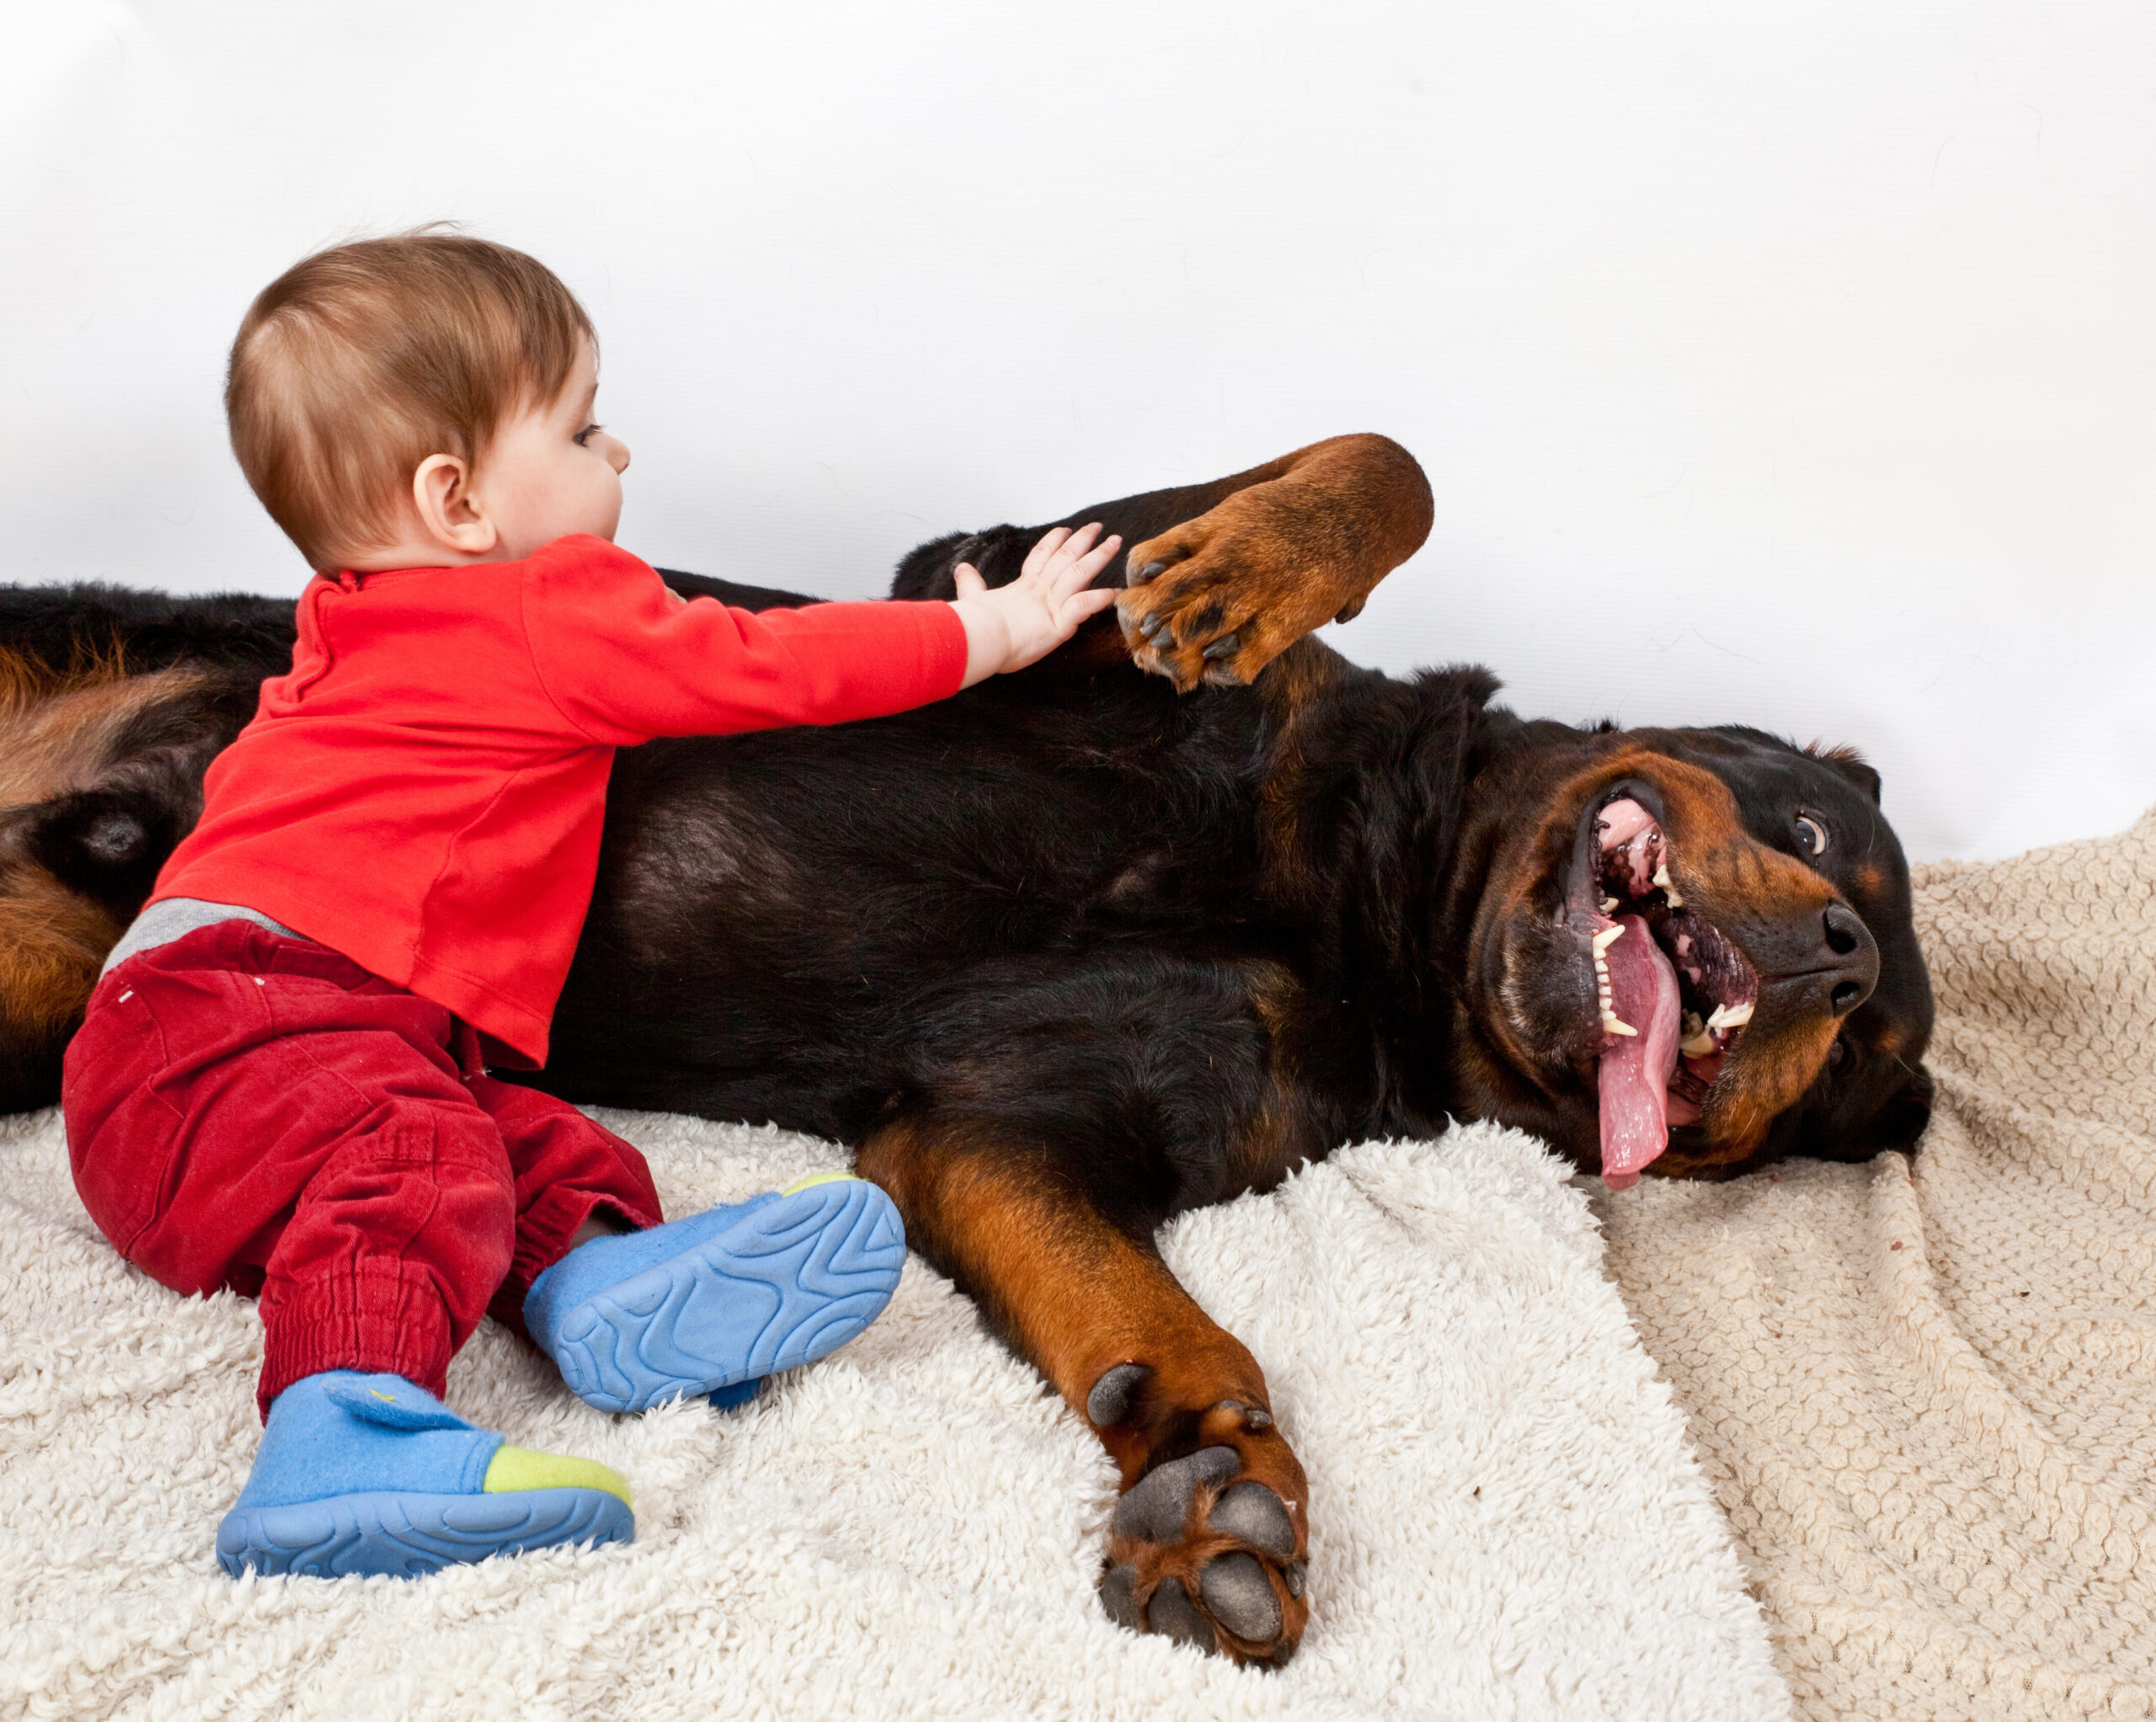 Little boy dressed in red costume playing with a big black dog b